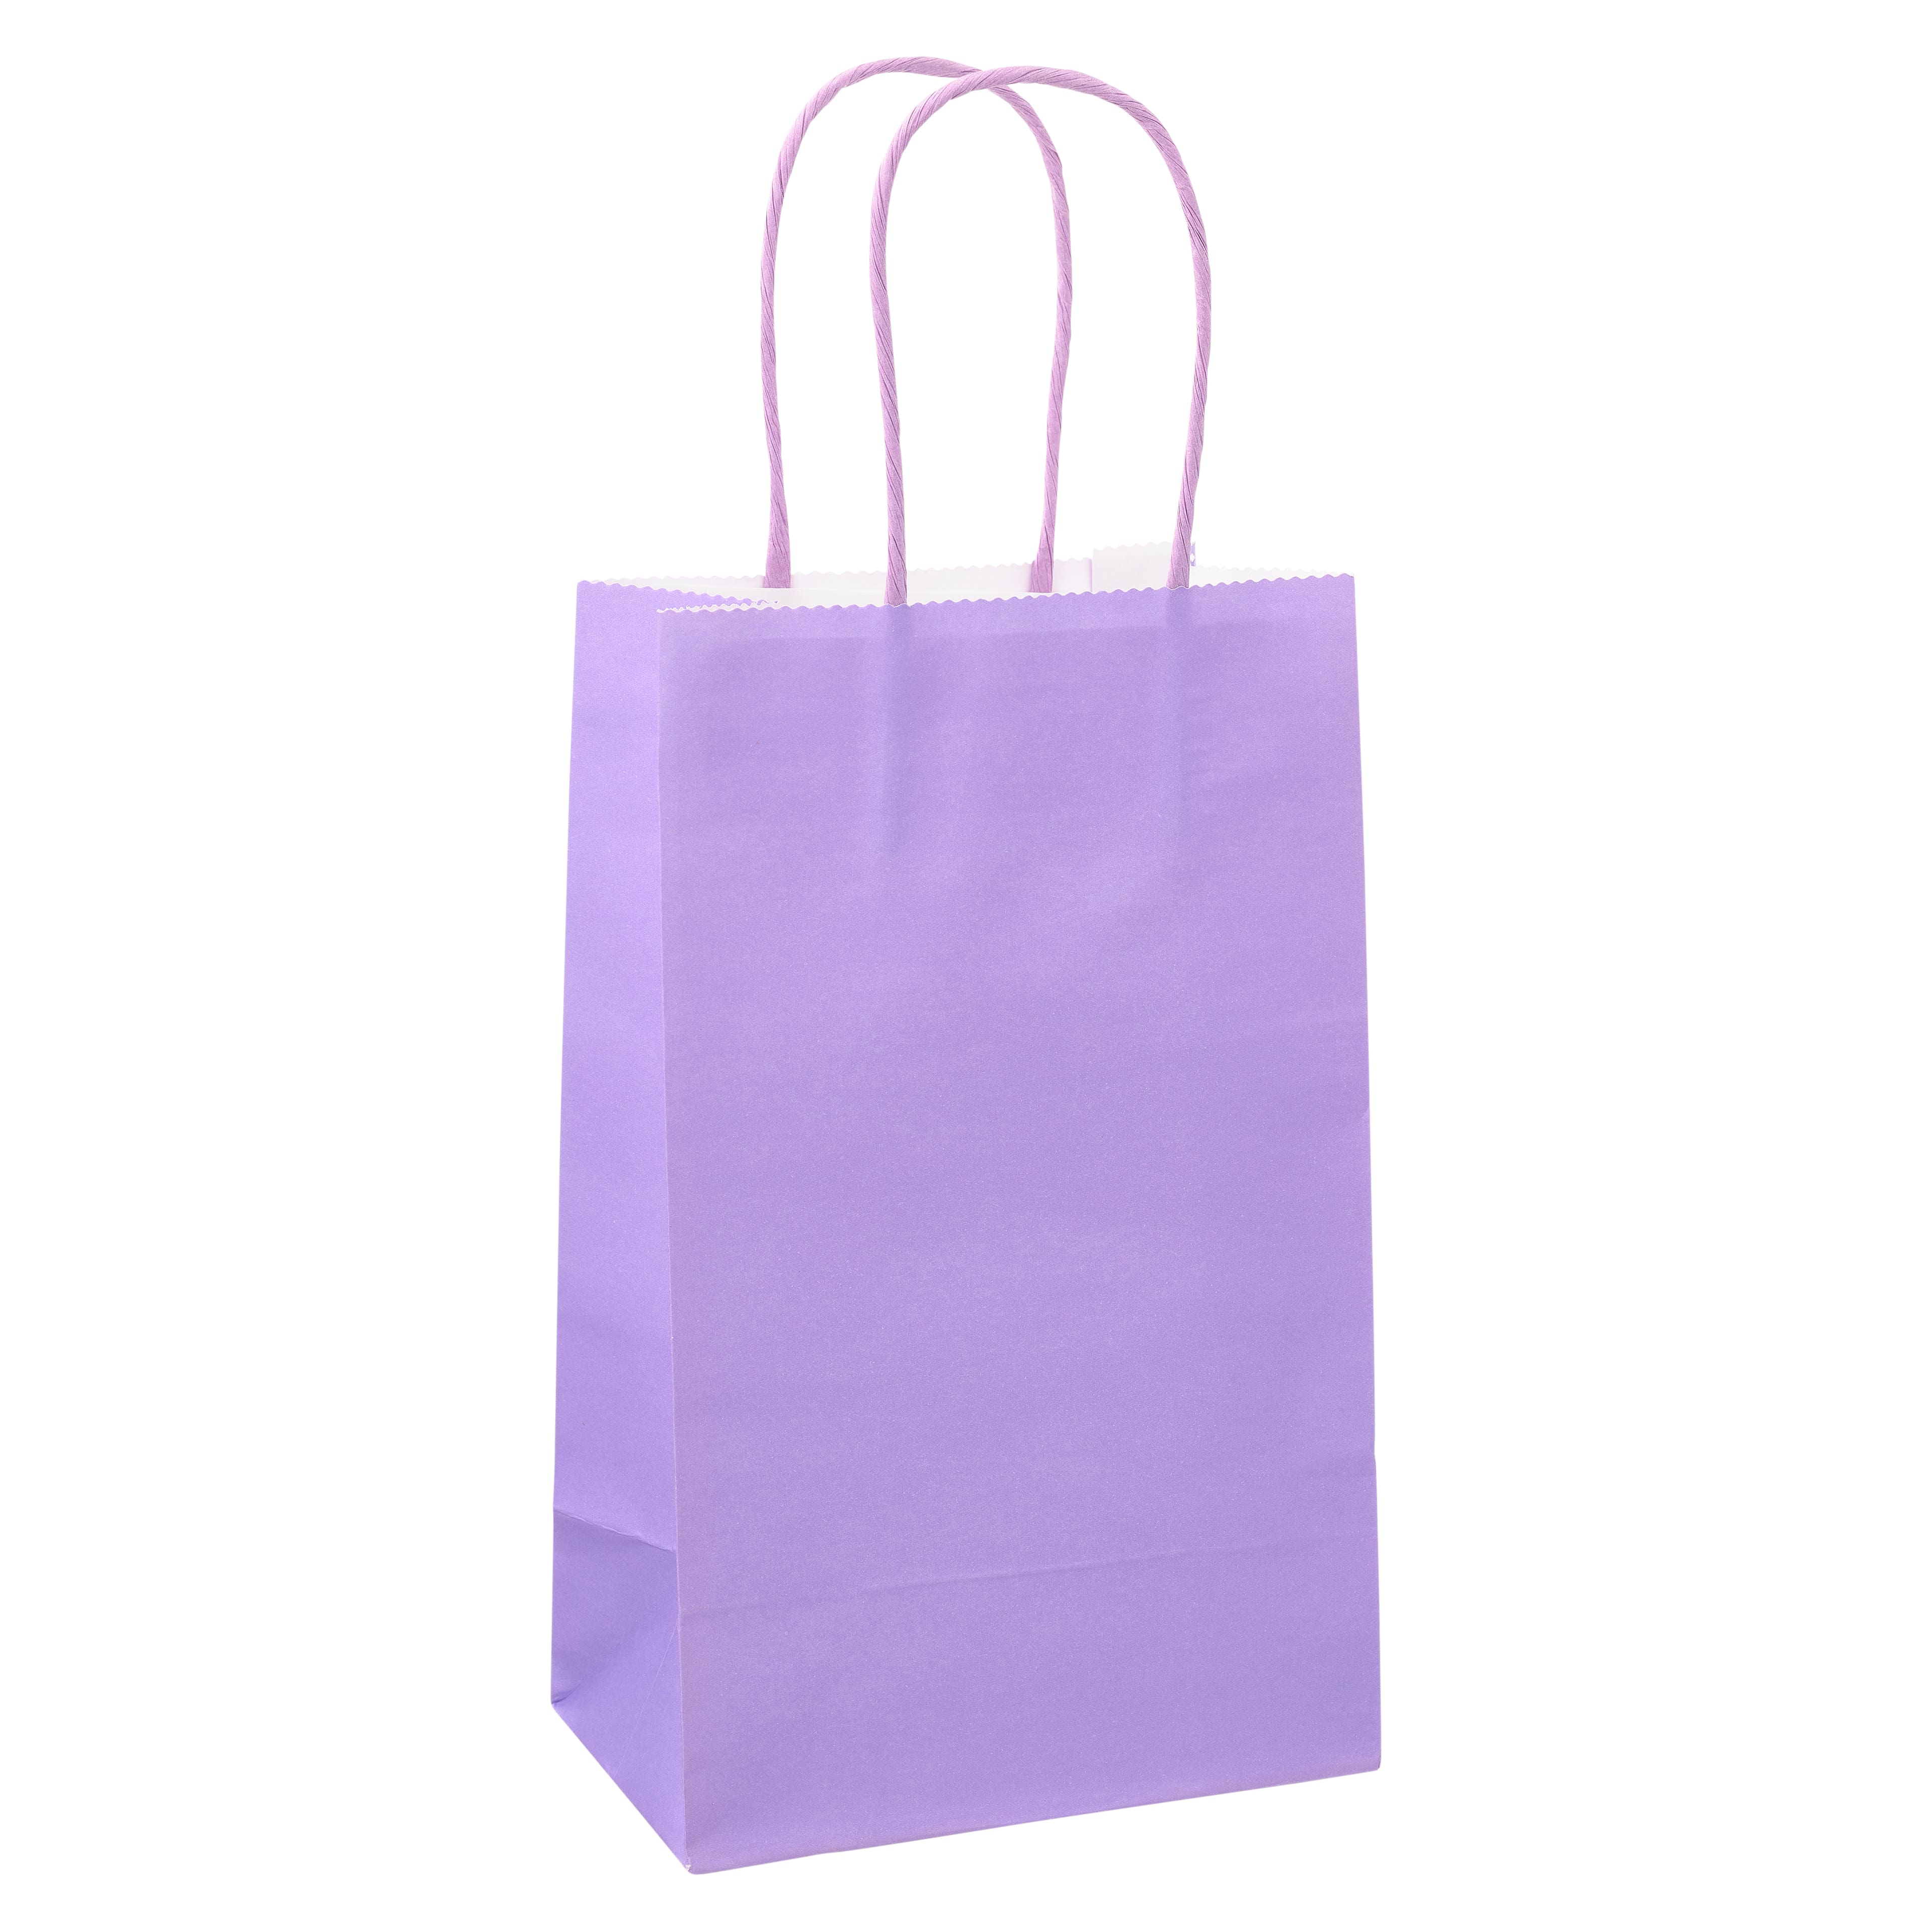 Packaging Bags Small Business  Plastic Bags Small Business  Small Plastic Bags  Gifts  Gift Boxes  Bags  Aliexpress